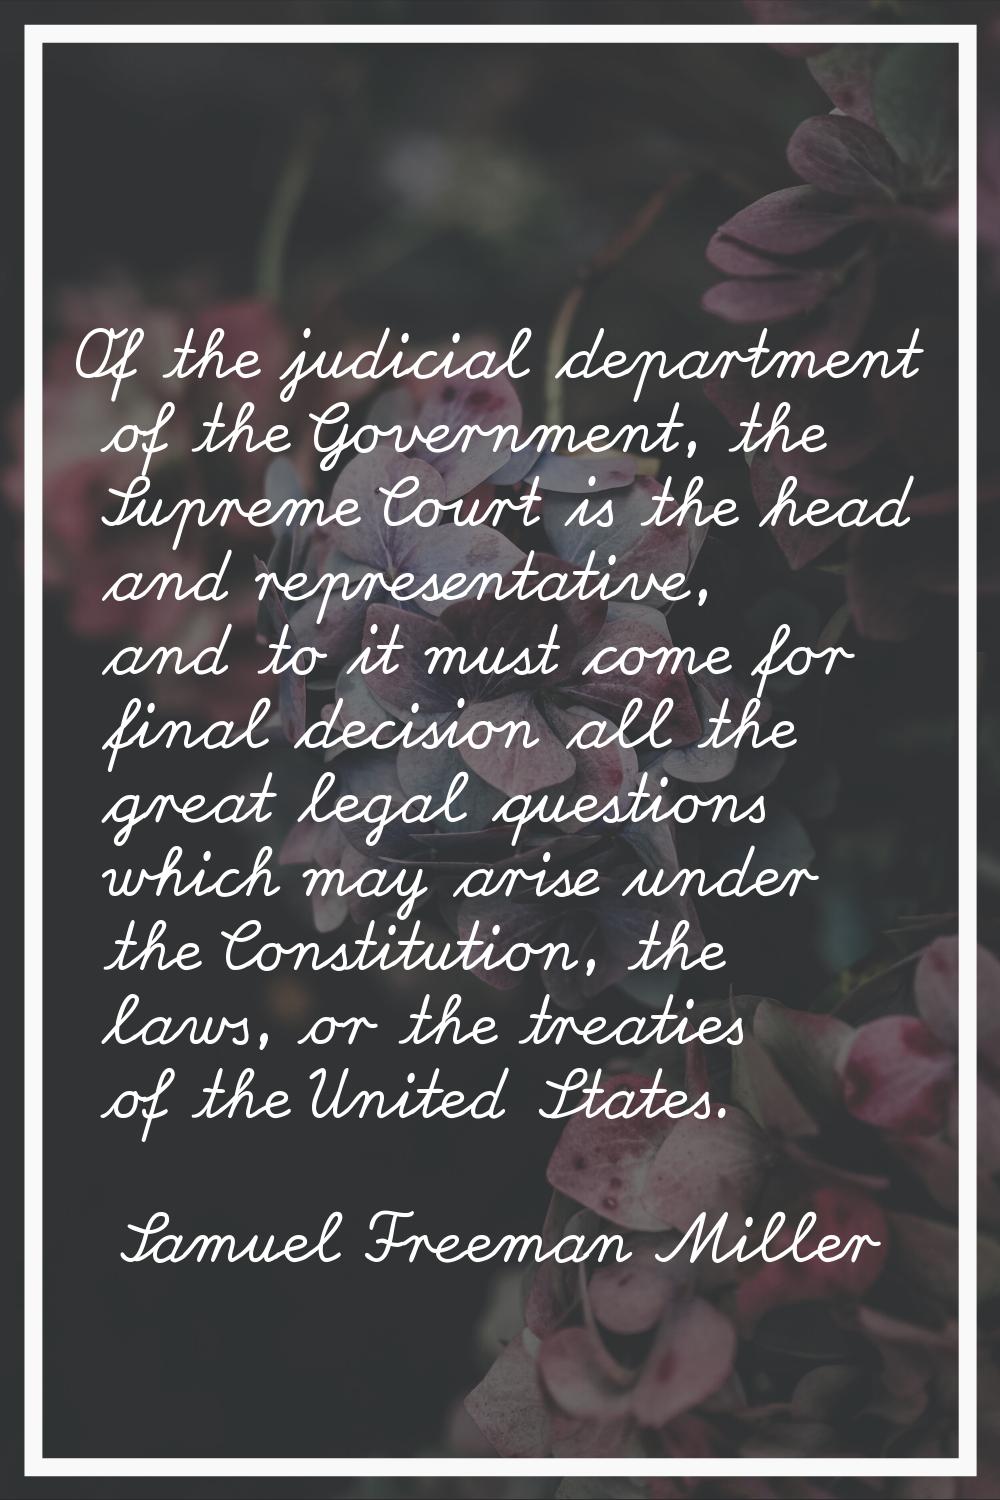 Of the judicial department of the Government, the Supreme Court is the head and representative, and